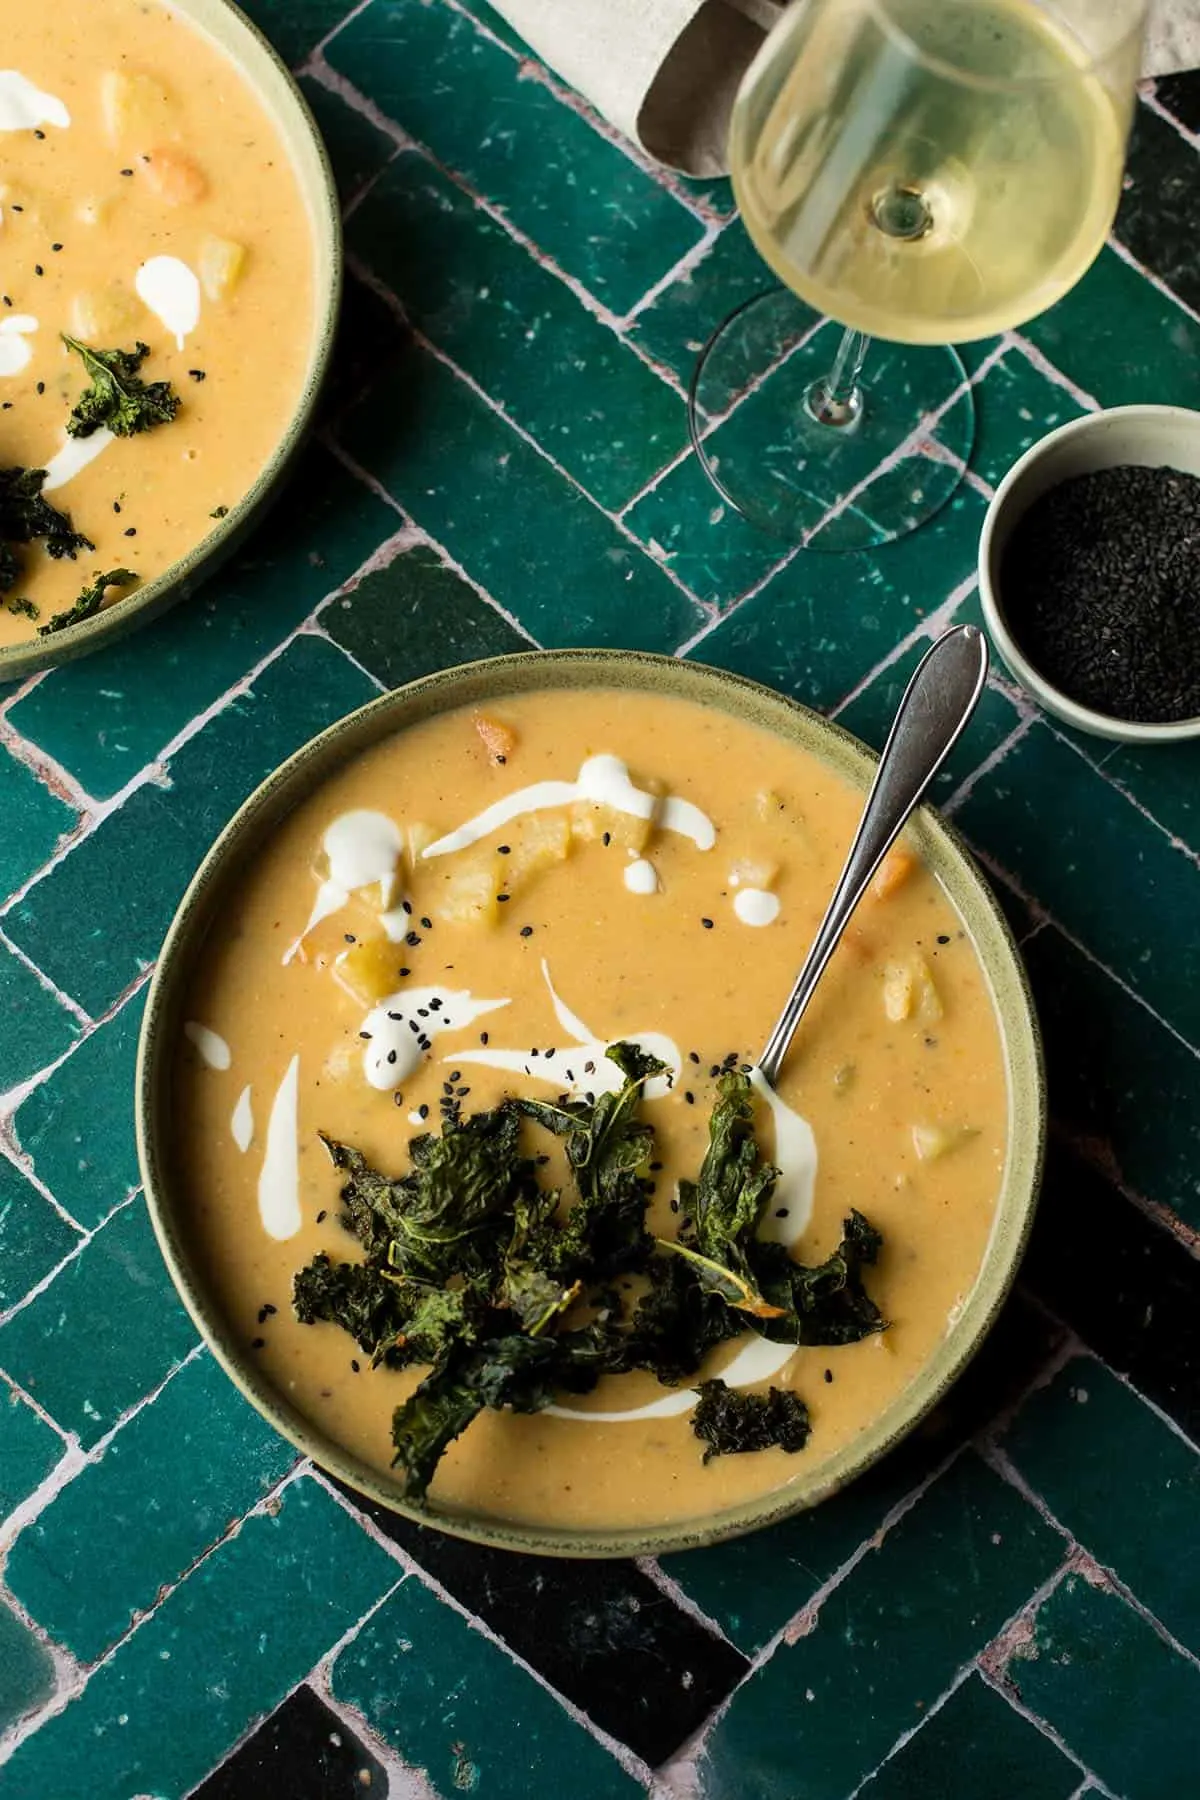 Potato and carrot soup topped with kale chips, seen from above.